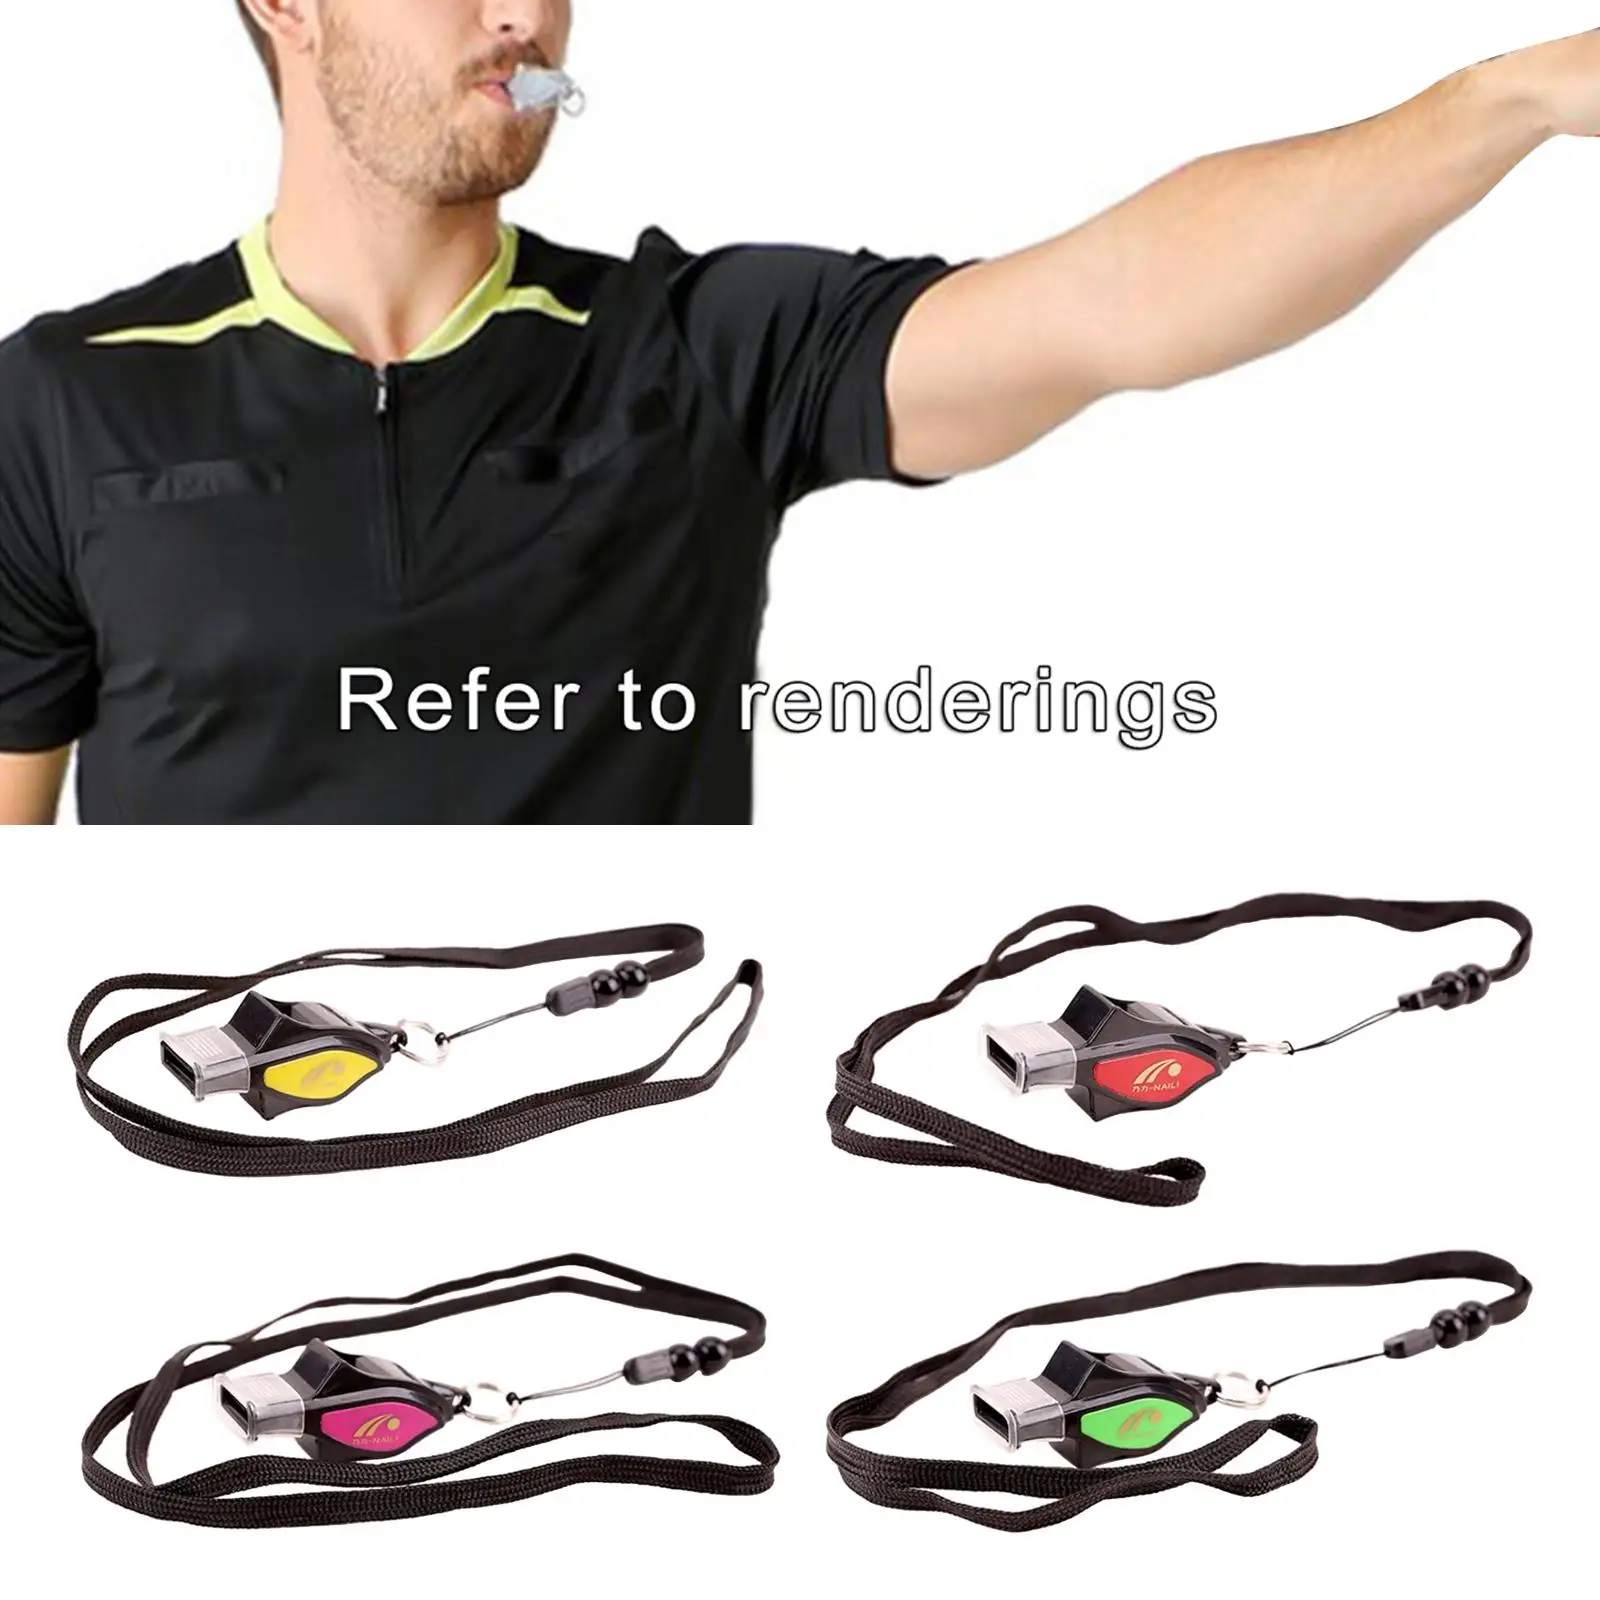 Plastic Sports Whistles with Lanyard Loud Crisp for Referees Basketball